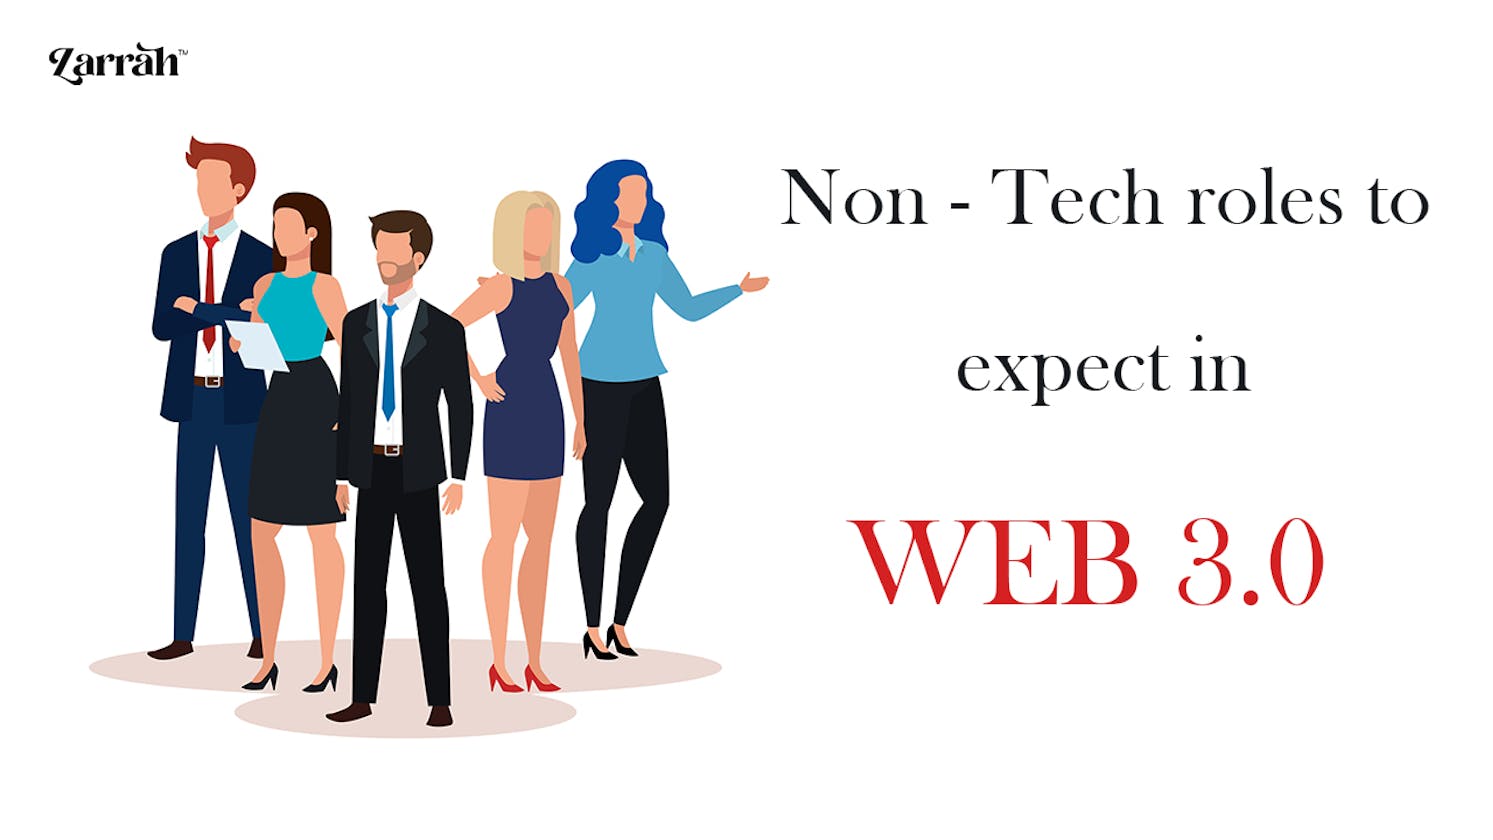 Non - Tech roles to expect in Web 3.0